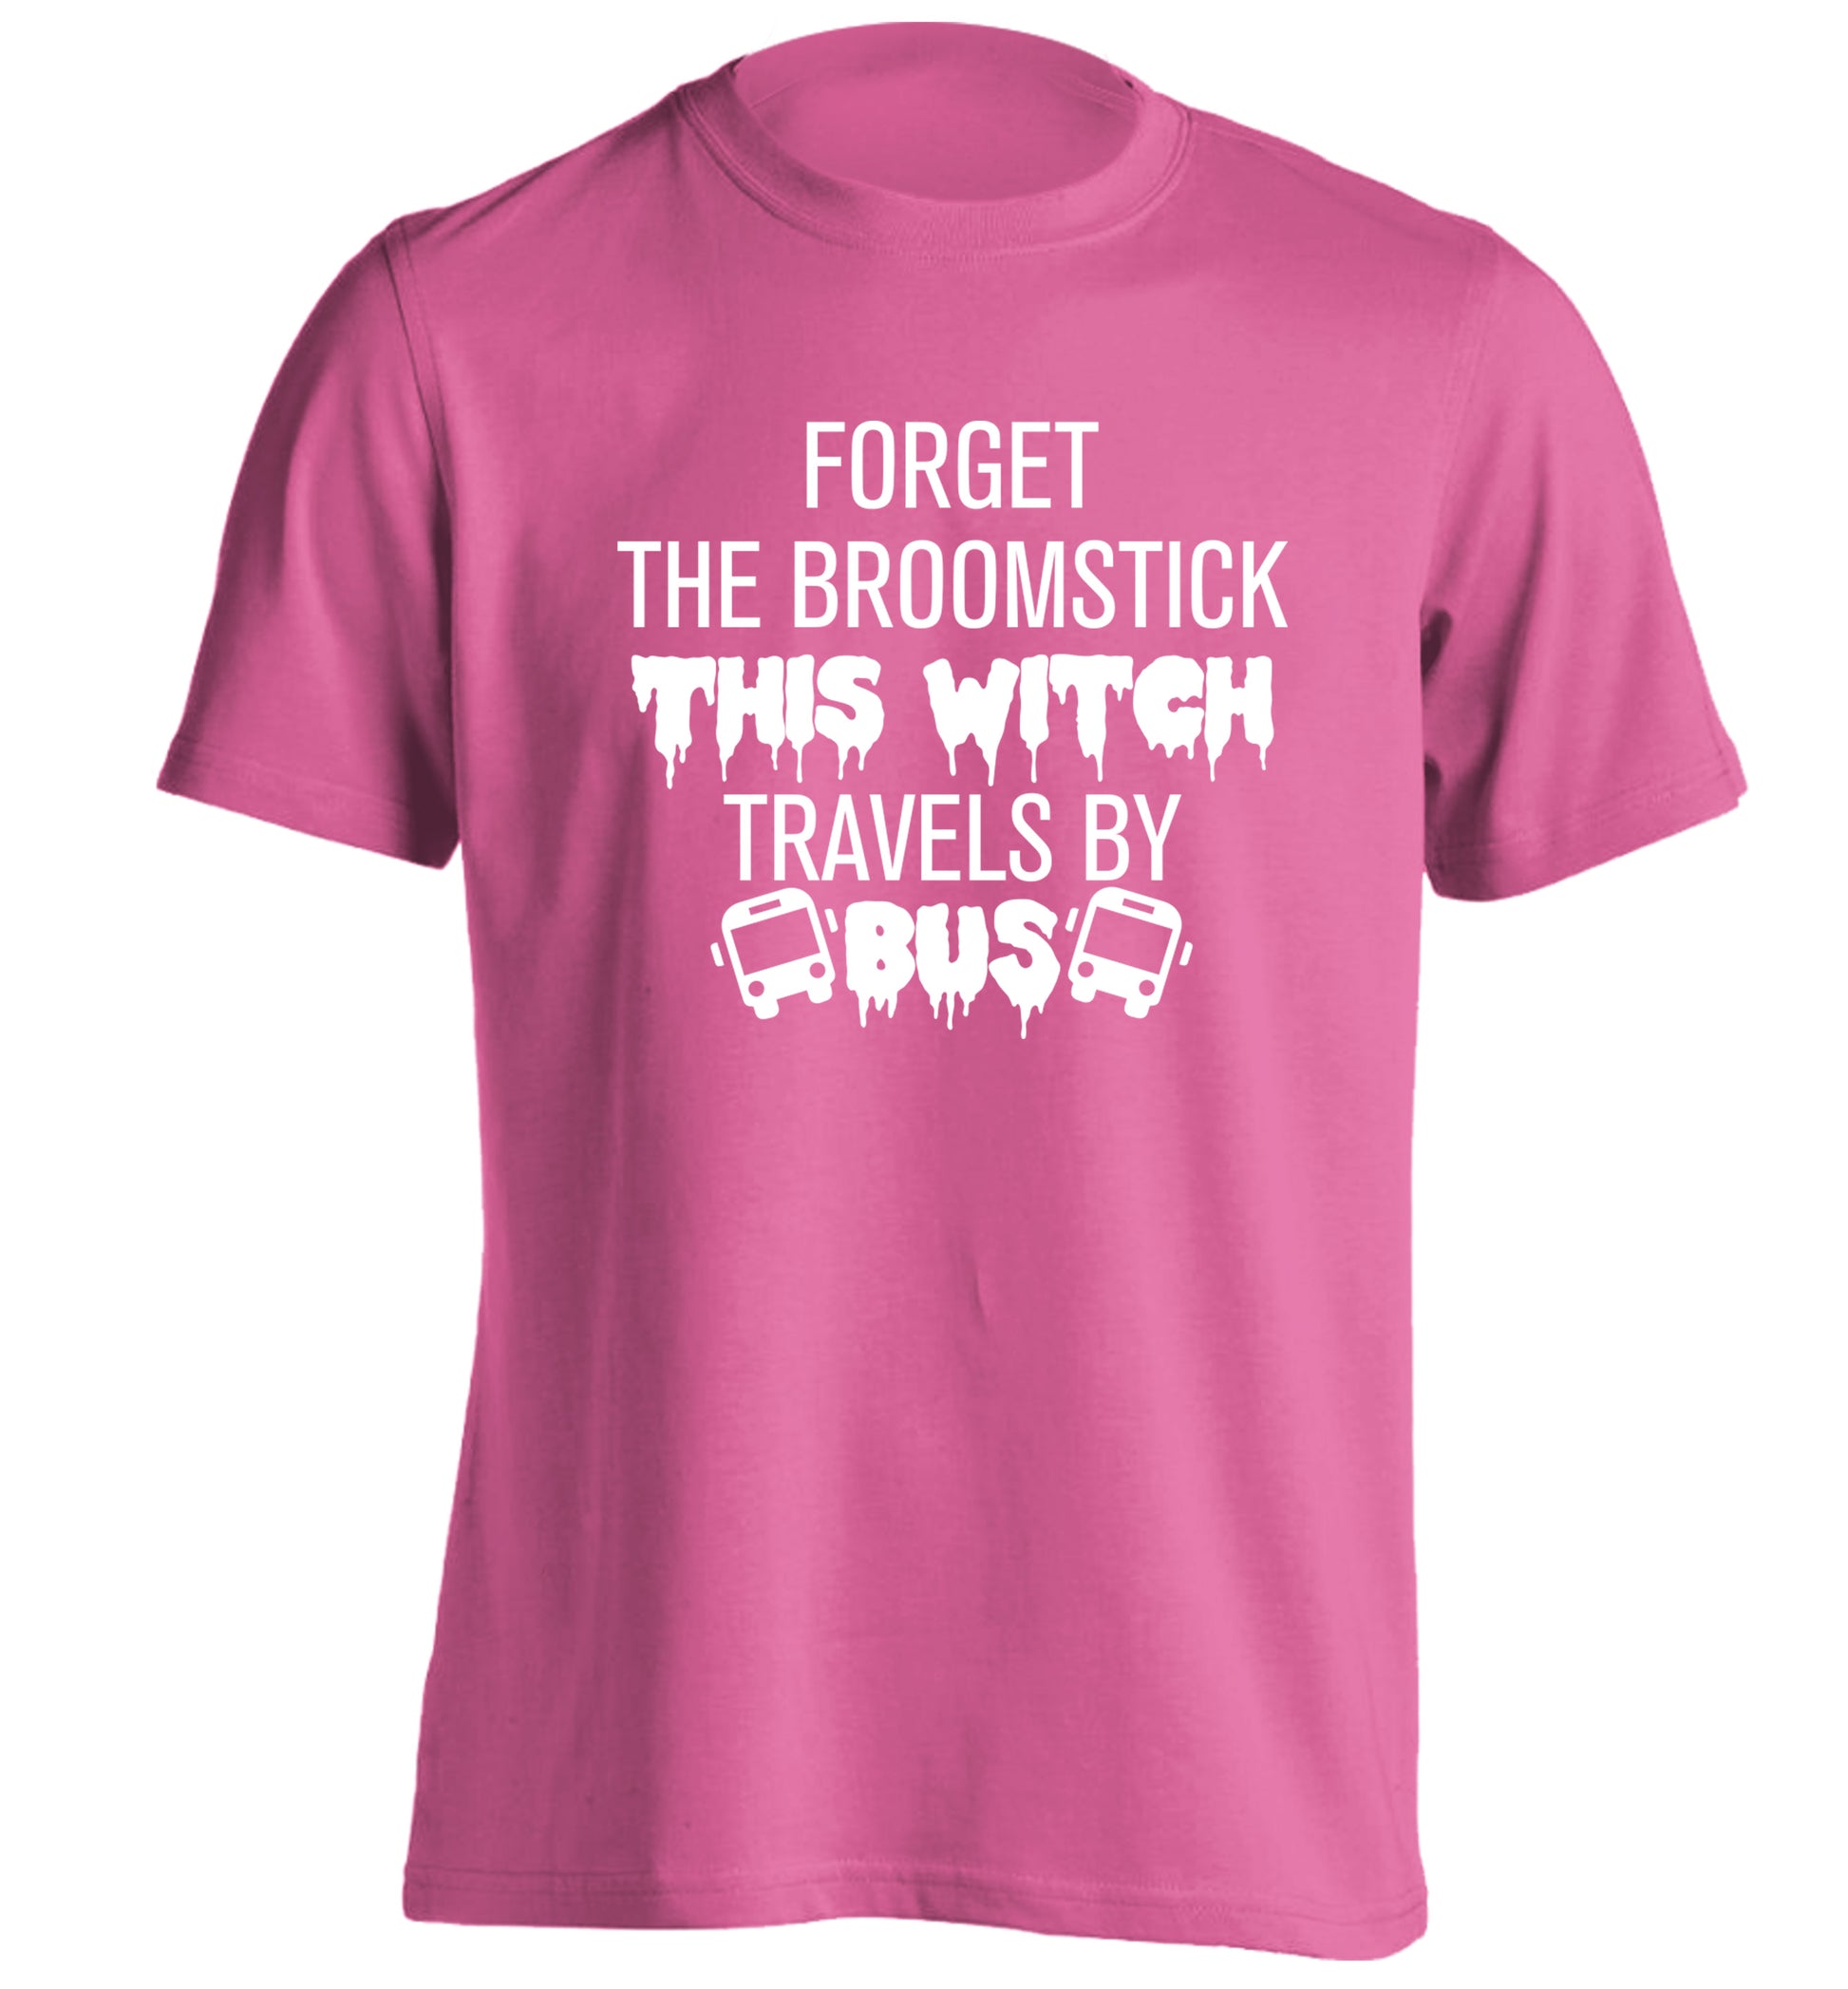 Forget the broomstick this witch travels by bus adults unisexpink Tshirt 2XL